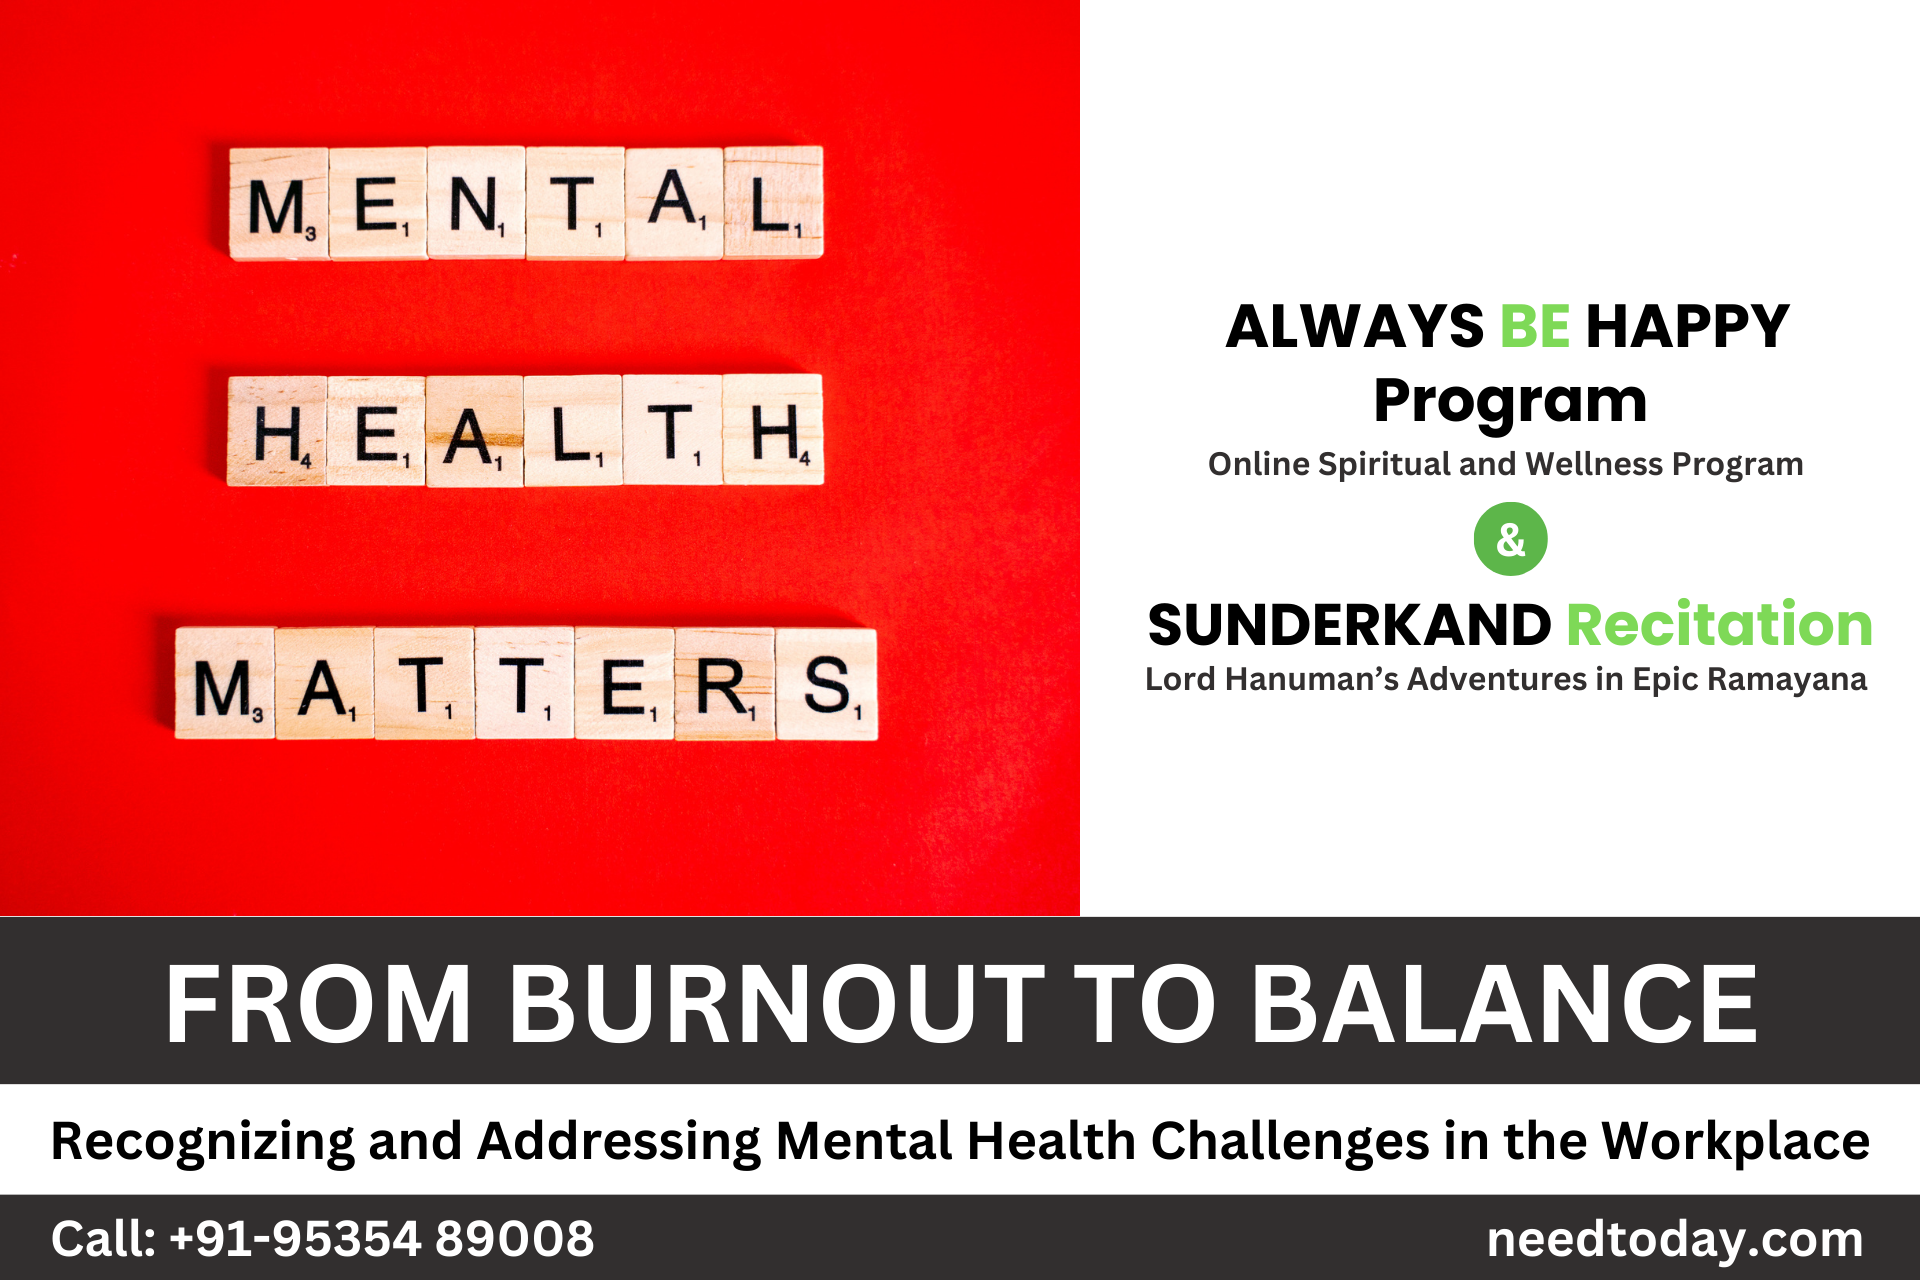 From Burnout to Balance: Recognizing and Addressing Mental Health Challenges in the Workplace